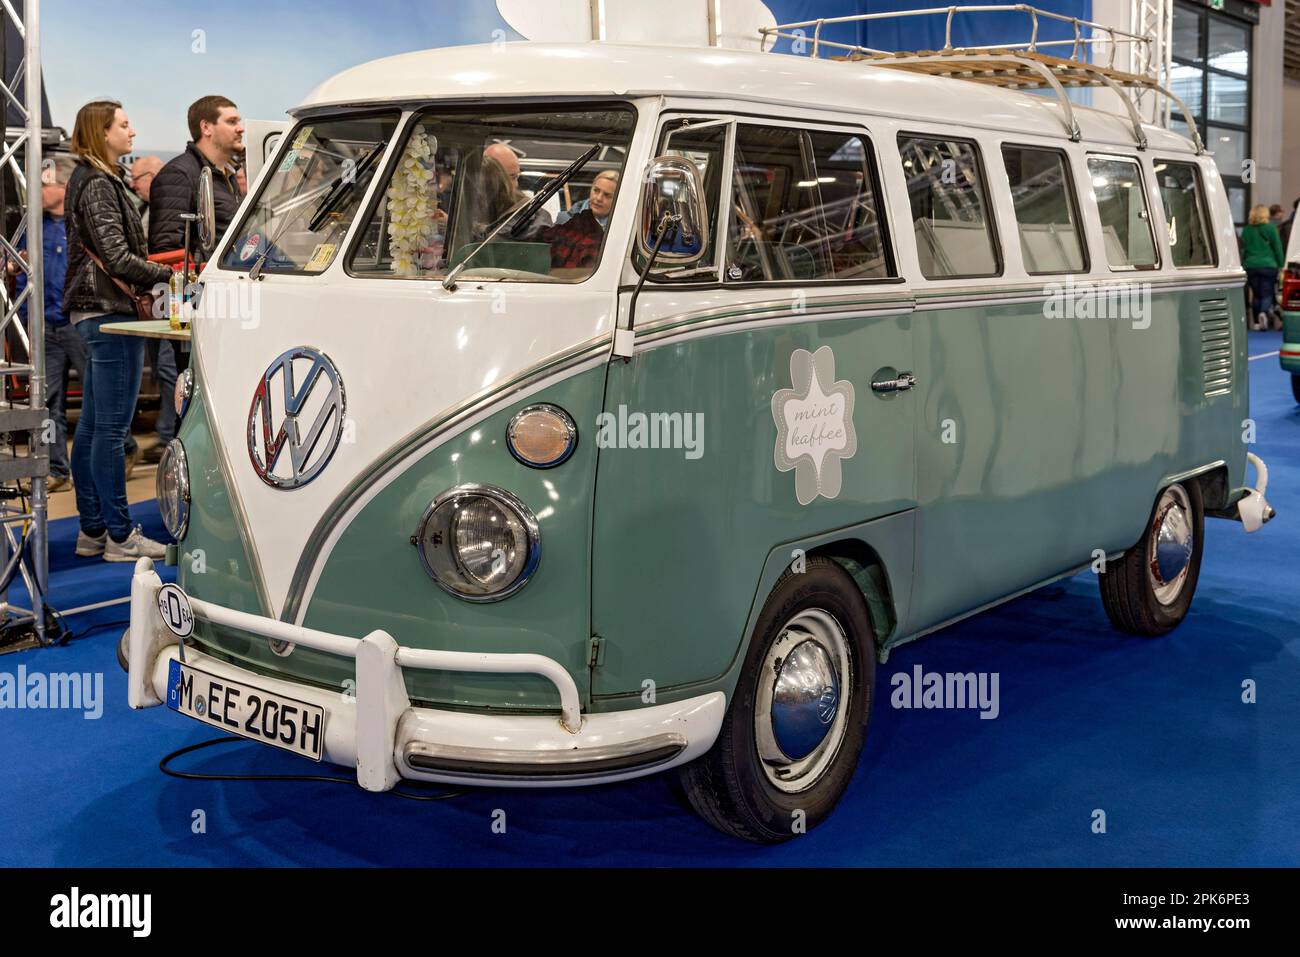 Vintage VW Volkswagen Type 2, T1 Transporter, Bulli, built 1950 to 1967, VW bus, minibus, coach, f.re.e, trade fair for leisure travel experience Stock Photo